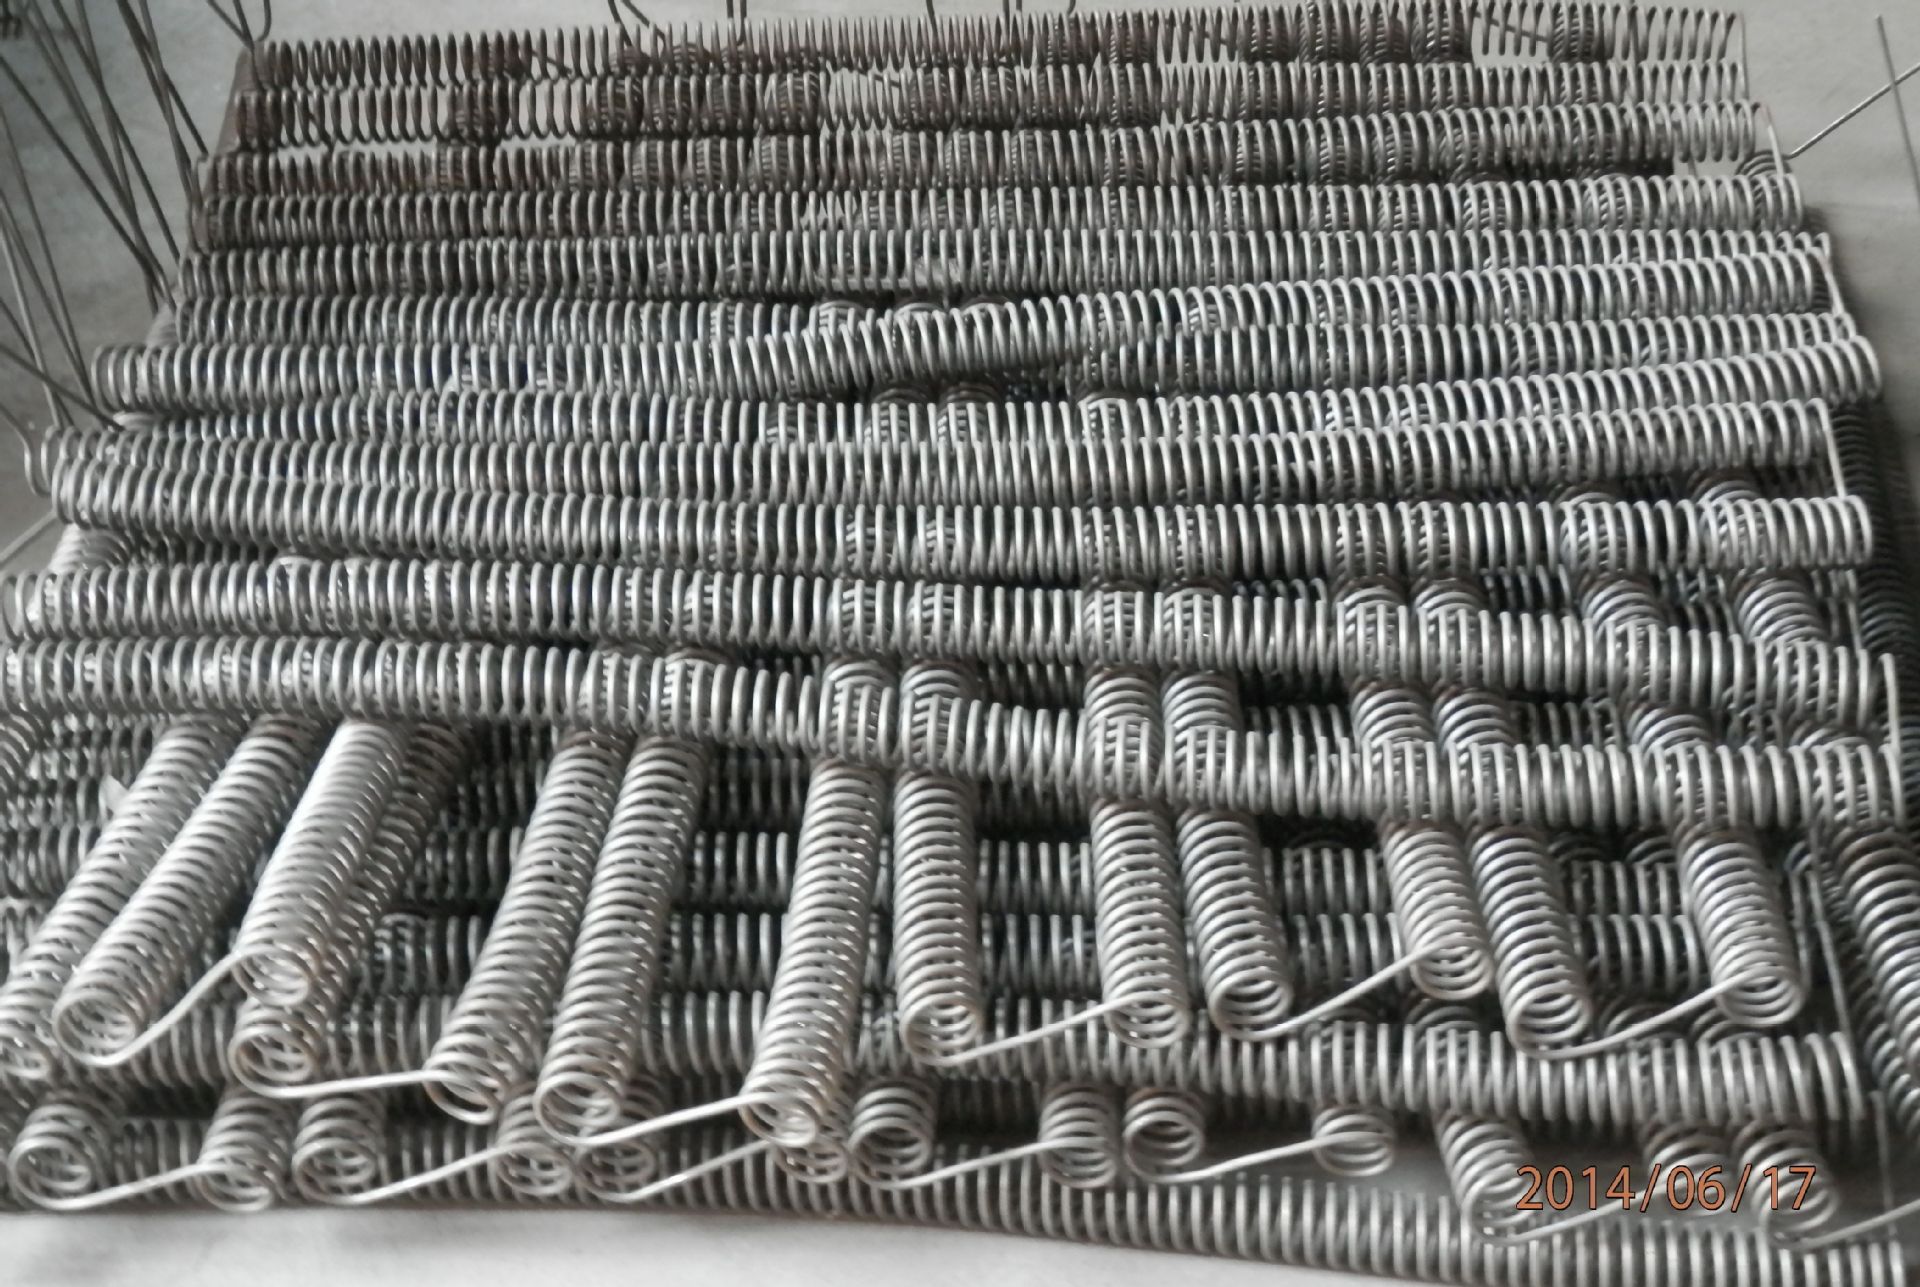 electrical heating elements in electric furnace for heat from luoyang electruan electric heating Co.,Ltd